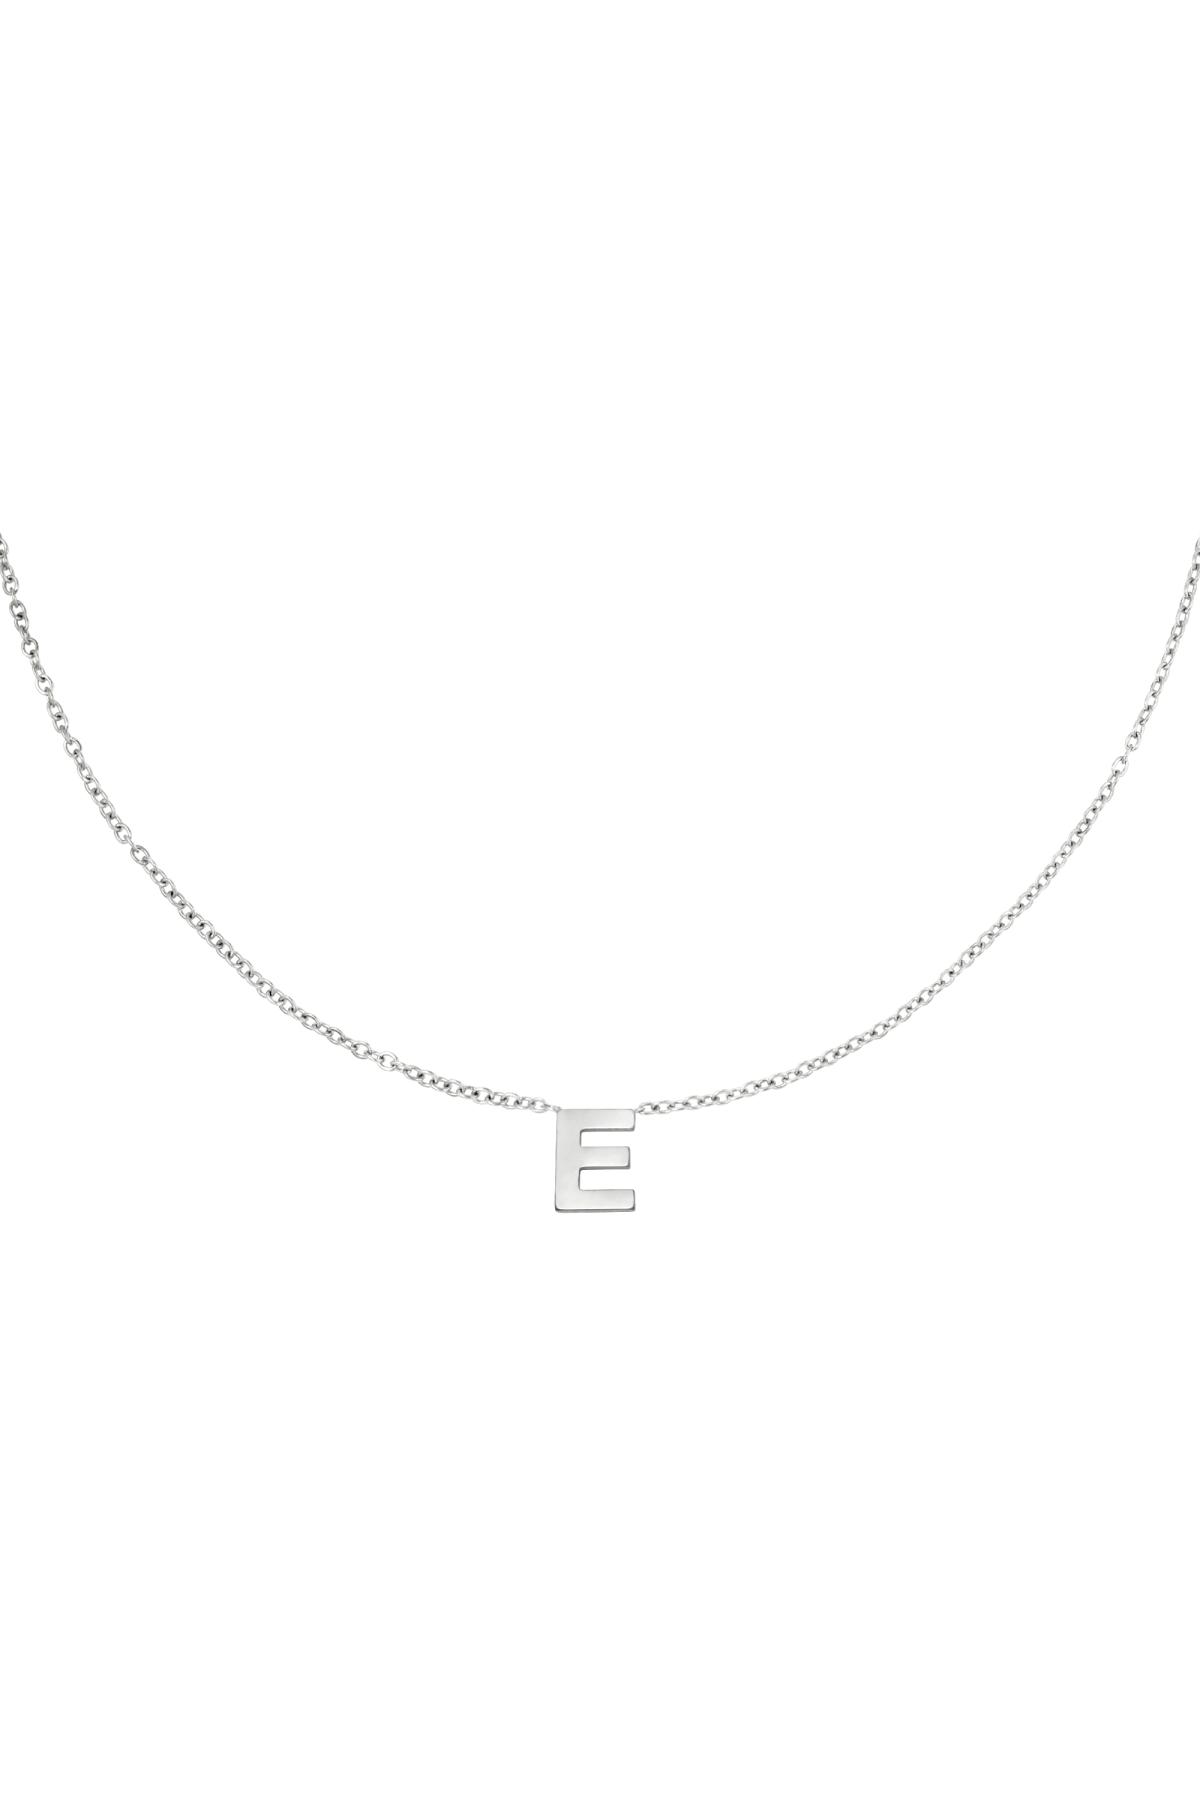 Silver / Stainless steel necklace initial E Silver Picture5